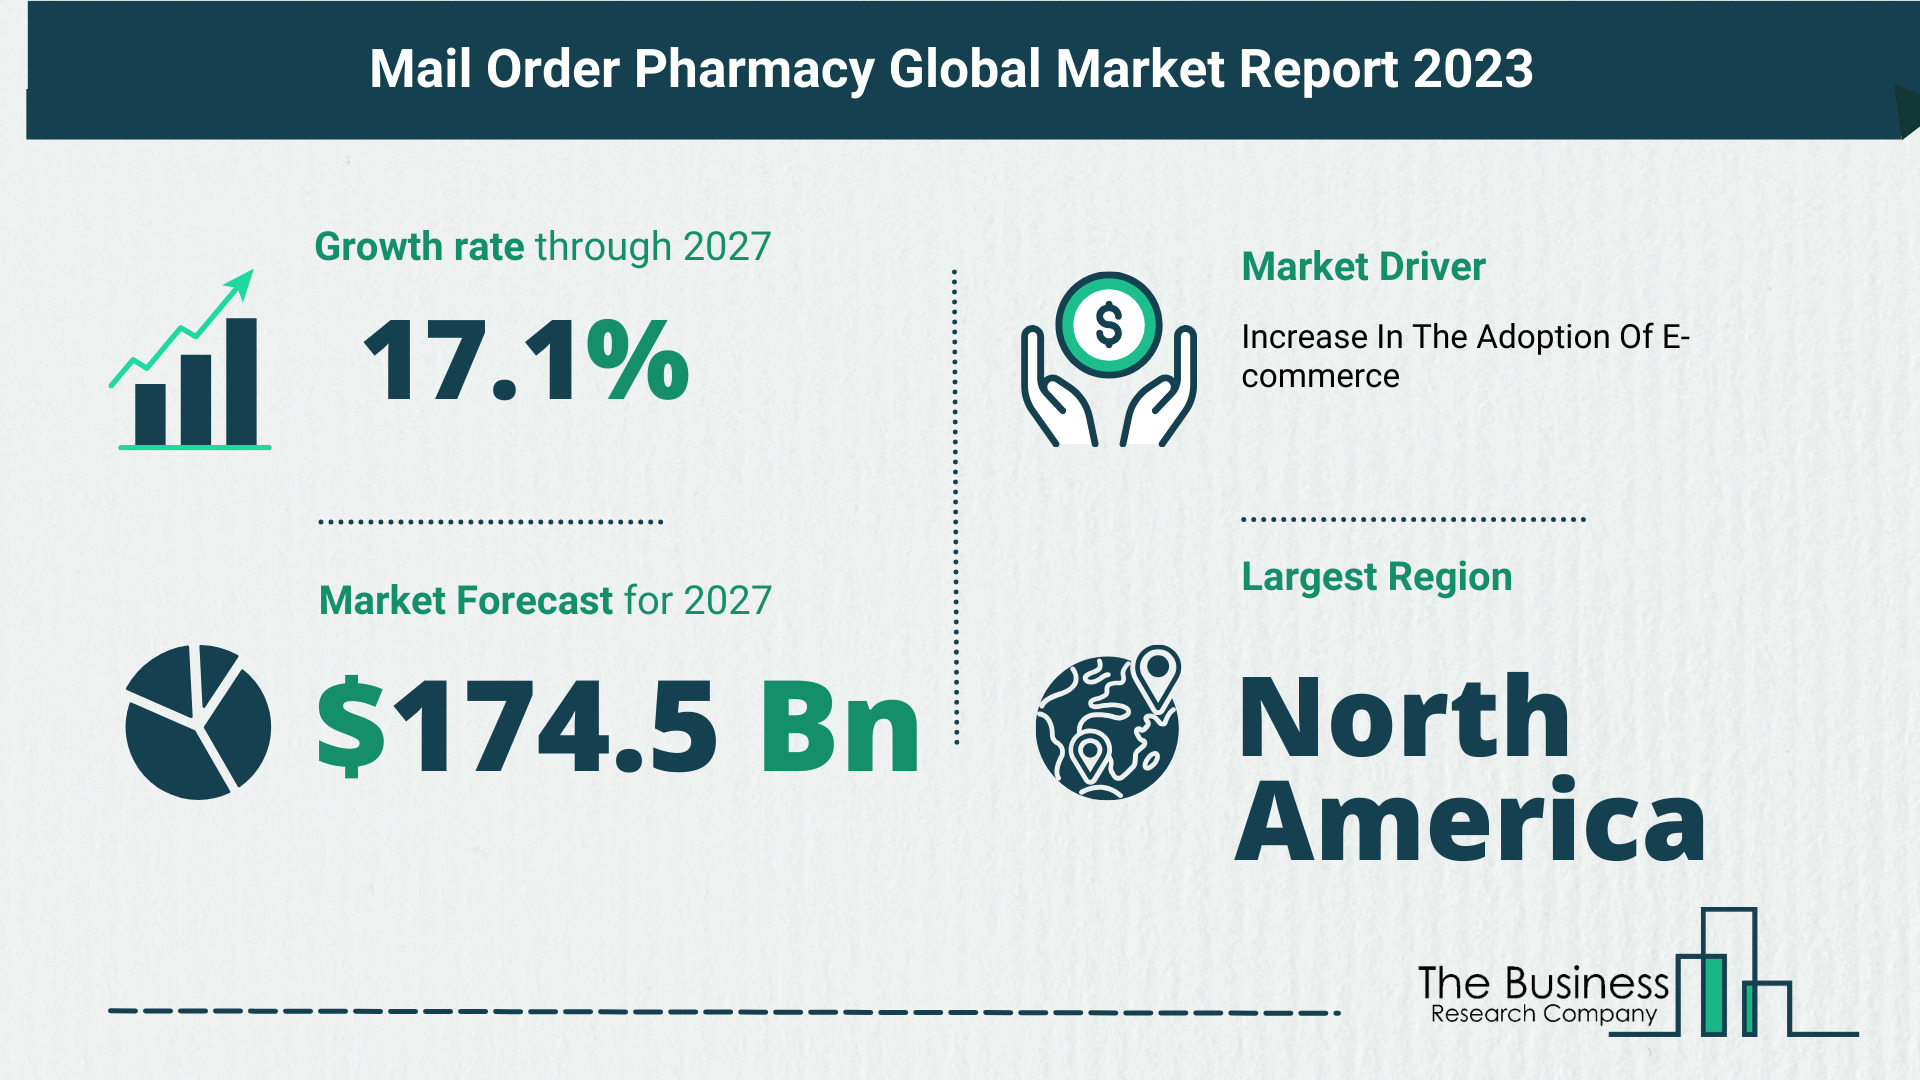 What Is The Forecast Growth Rate For The Mail Order Pharmacy Market?